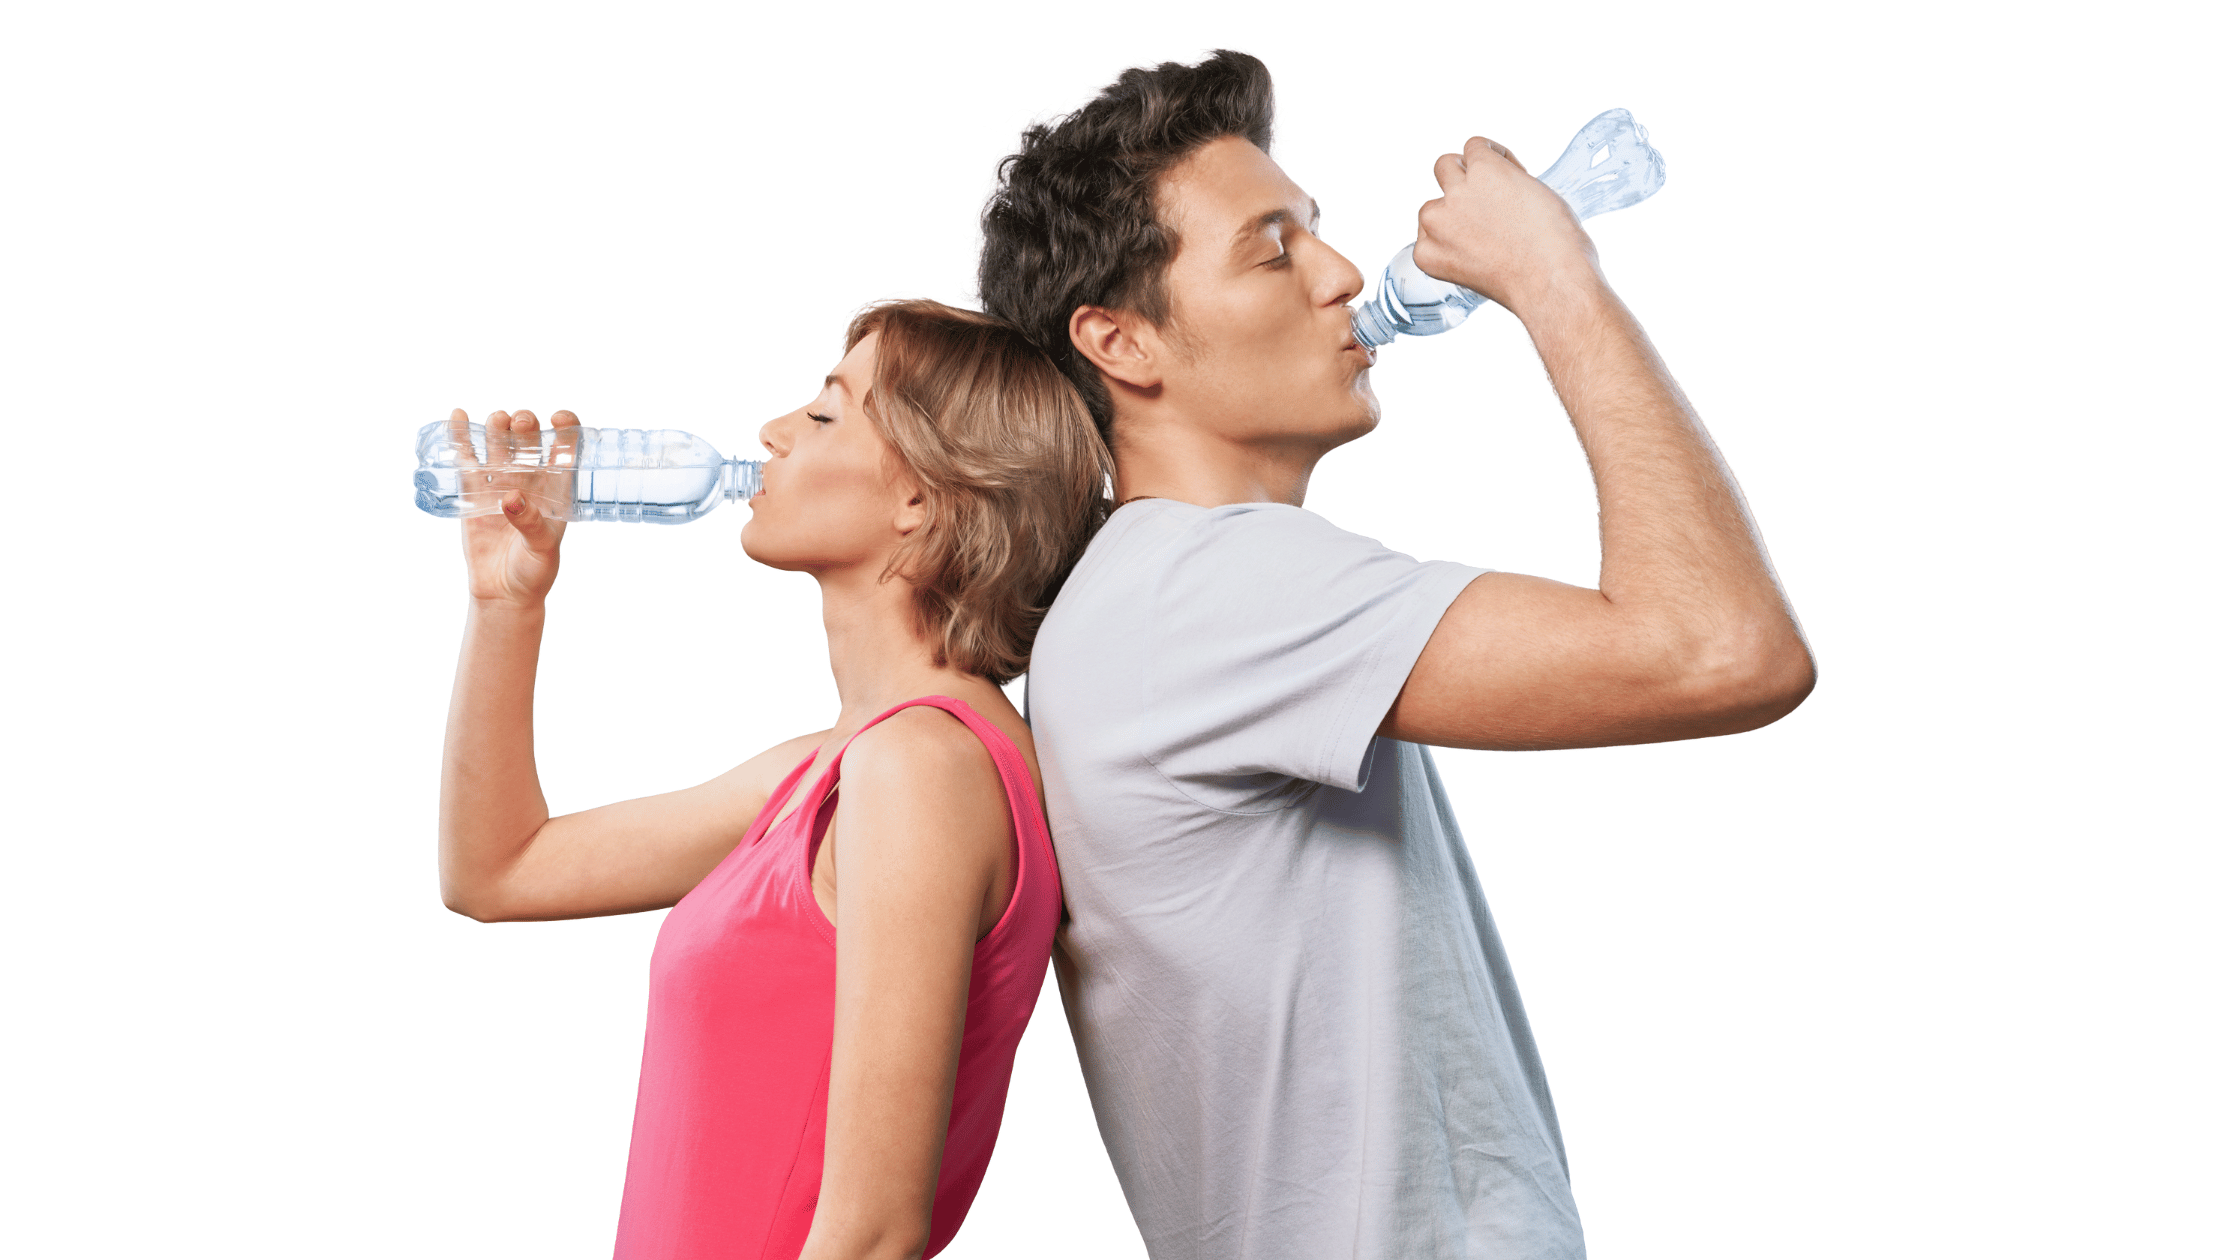 How to Recover From a Half Marathon Stay Hydrated